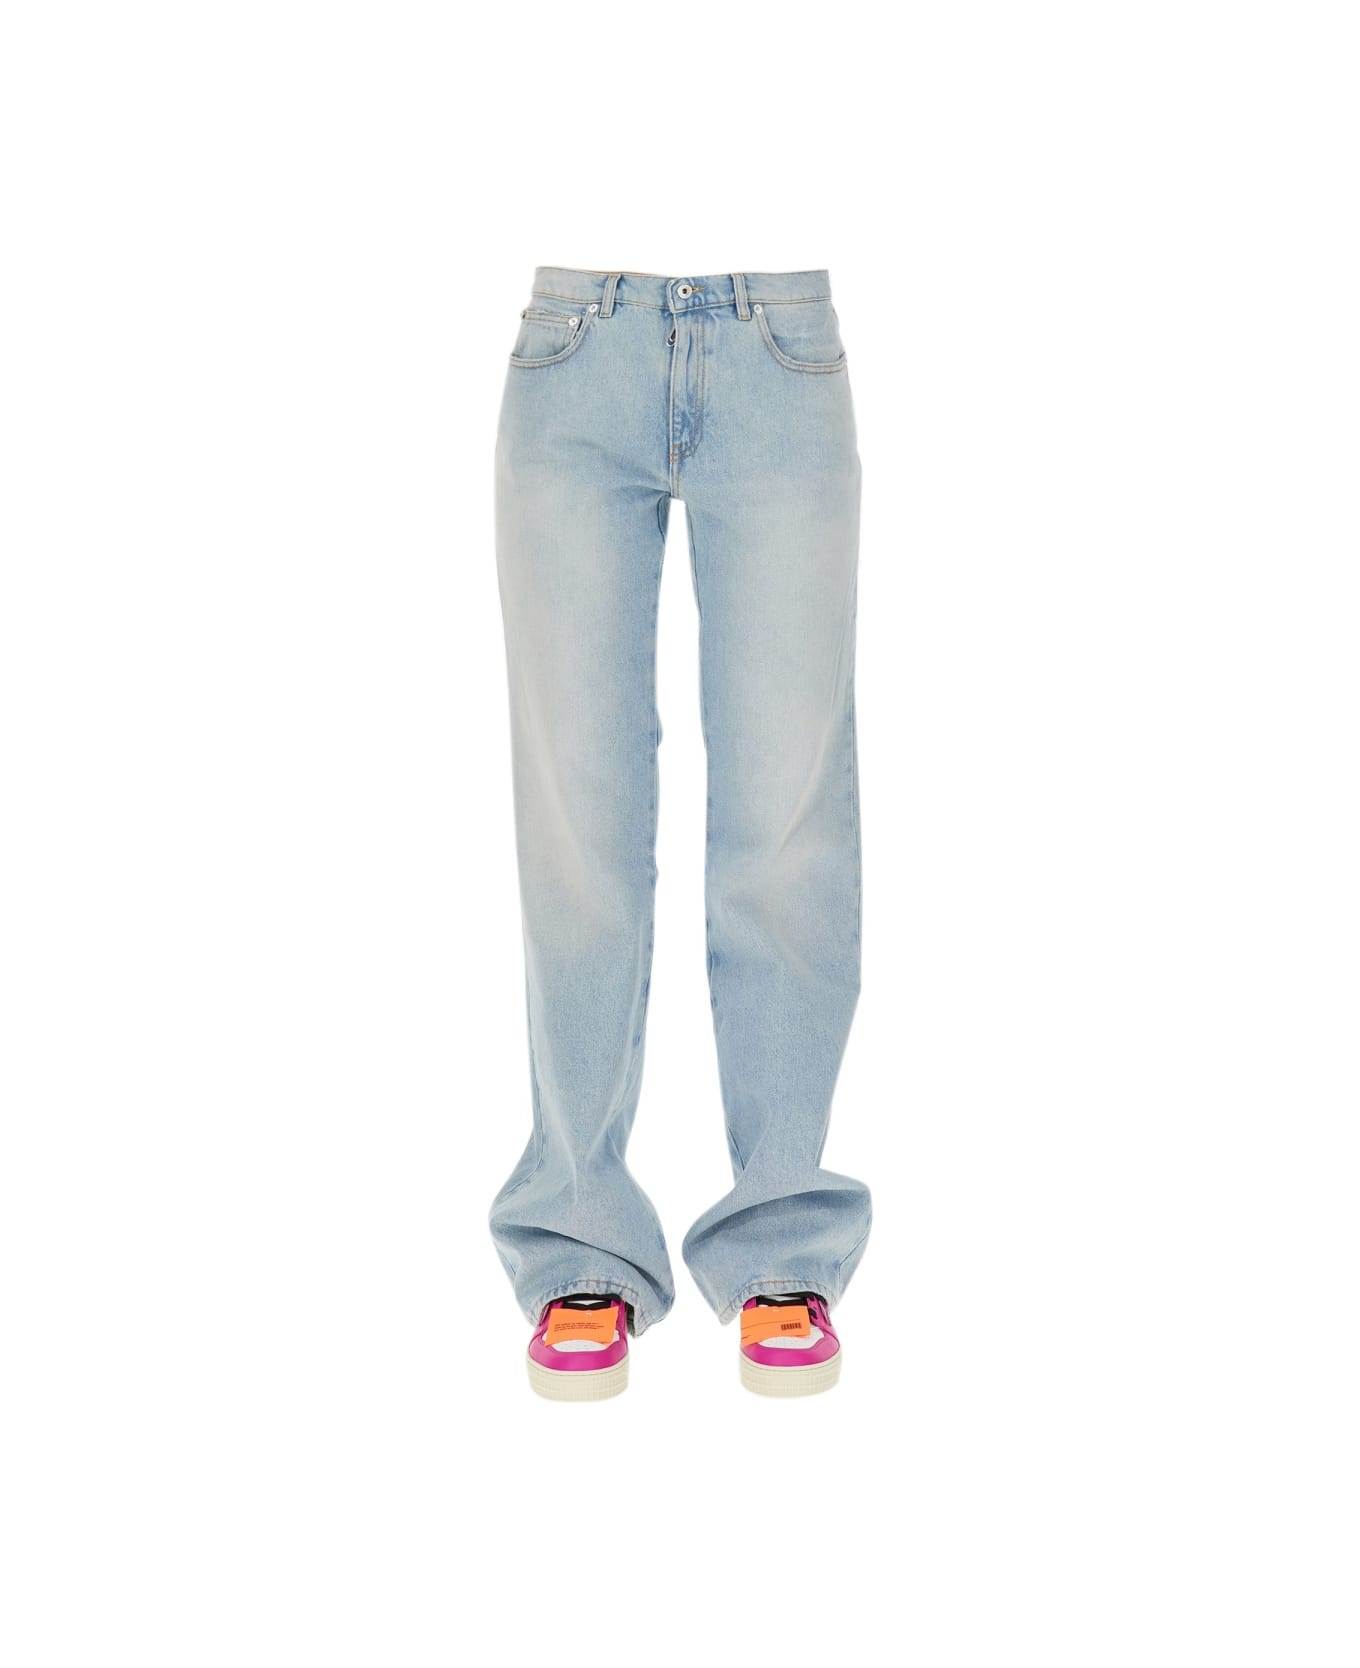 Off-White Beach Baby Baggy Jeans - BLUE